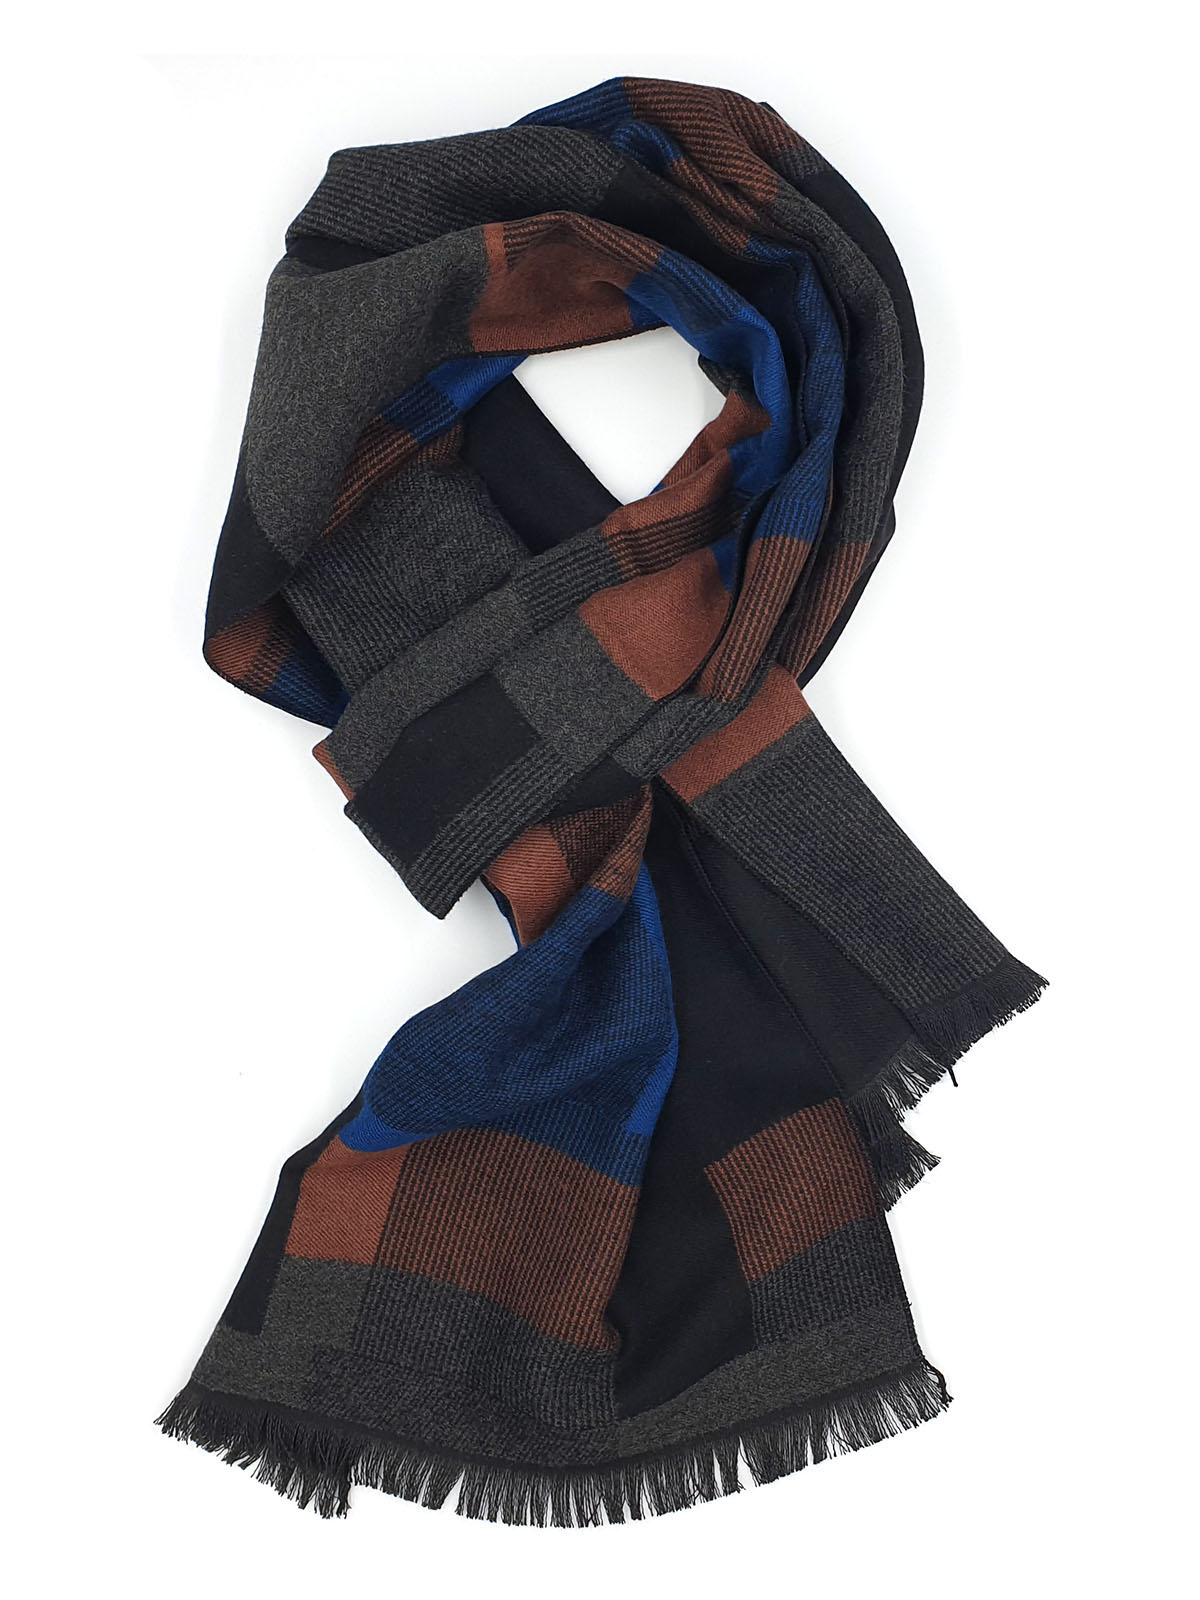 Spectacular winter scarf oil and brown - 10372 - € 19.68 img4